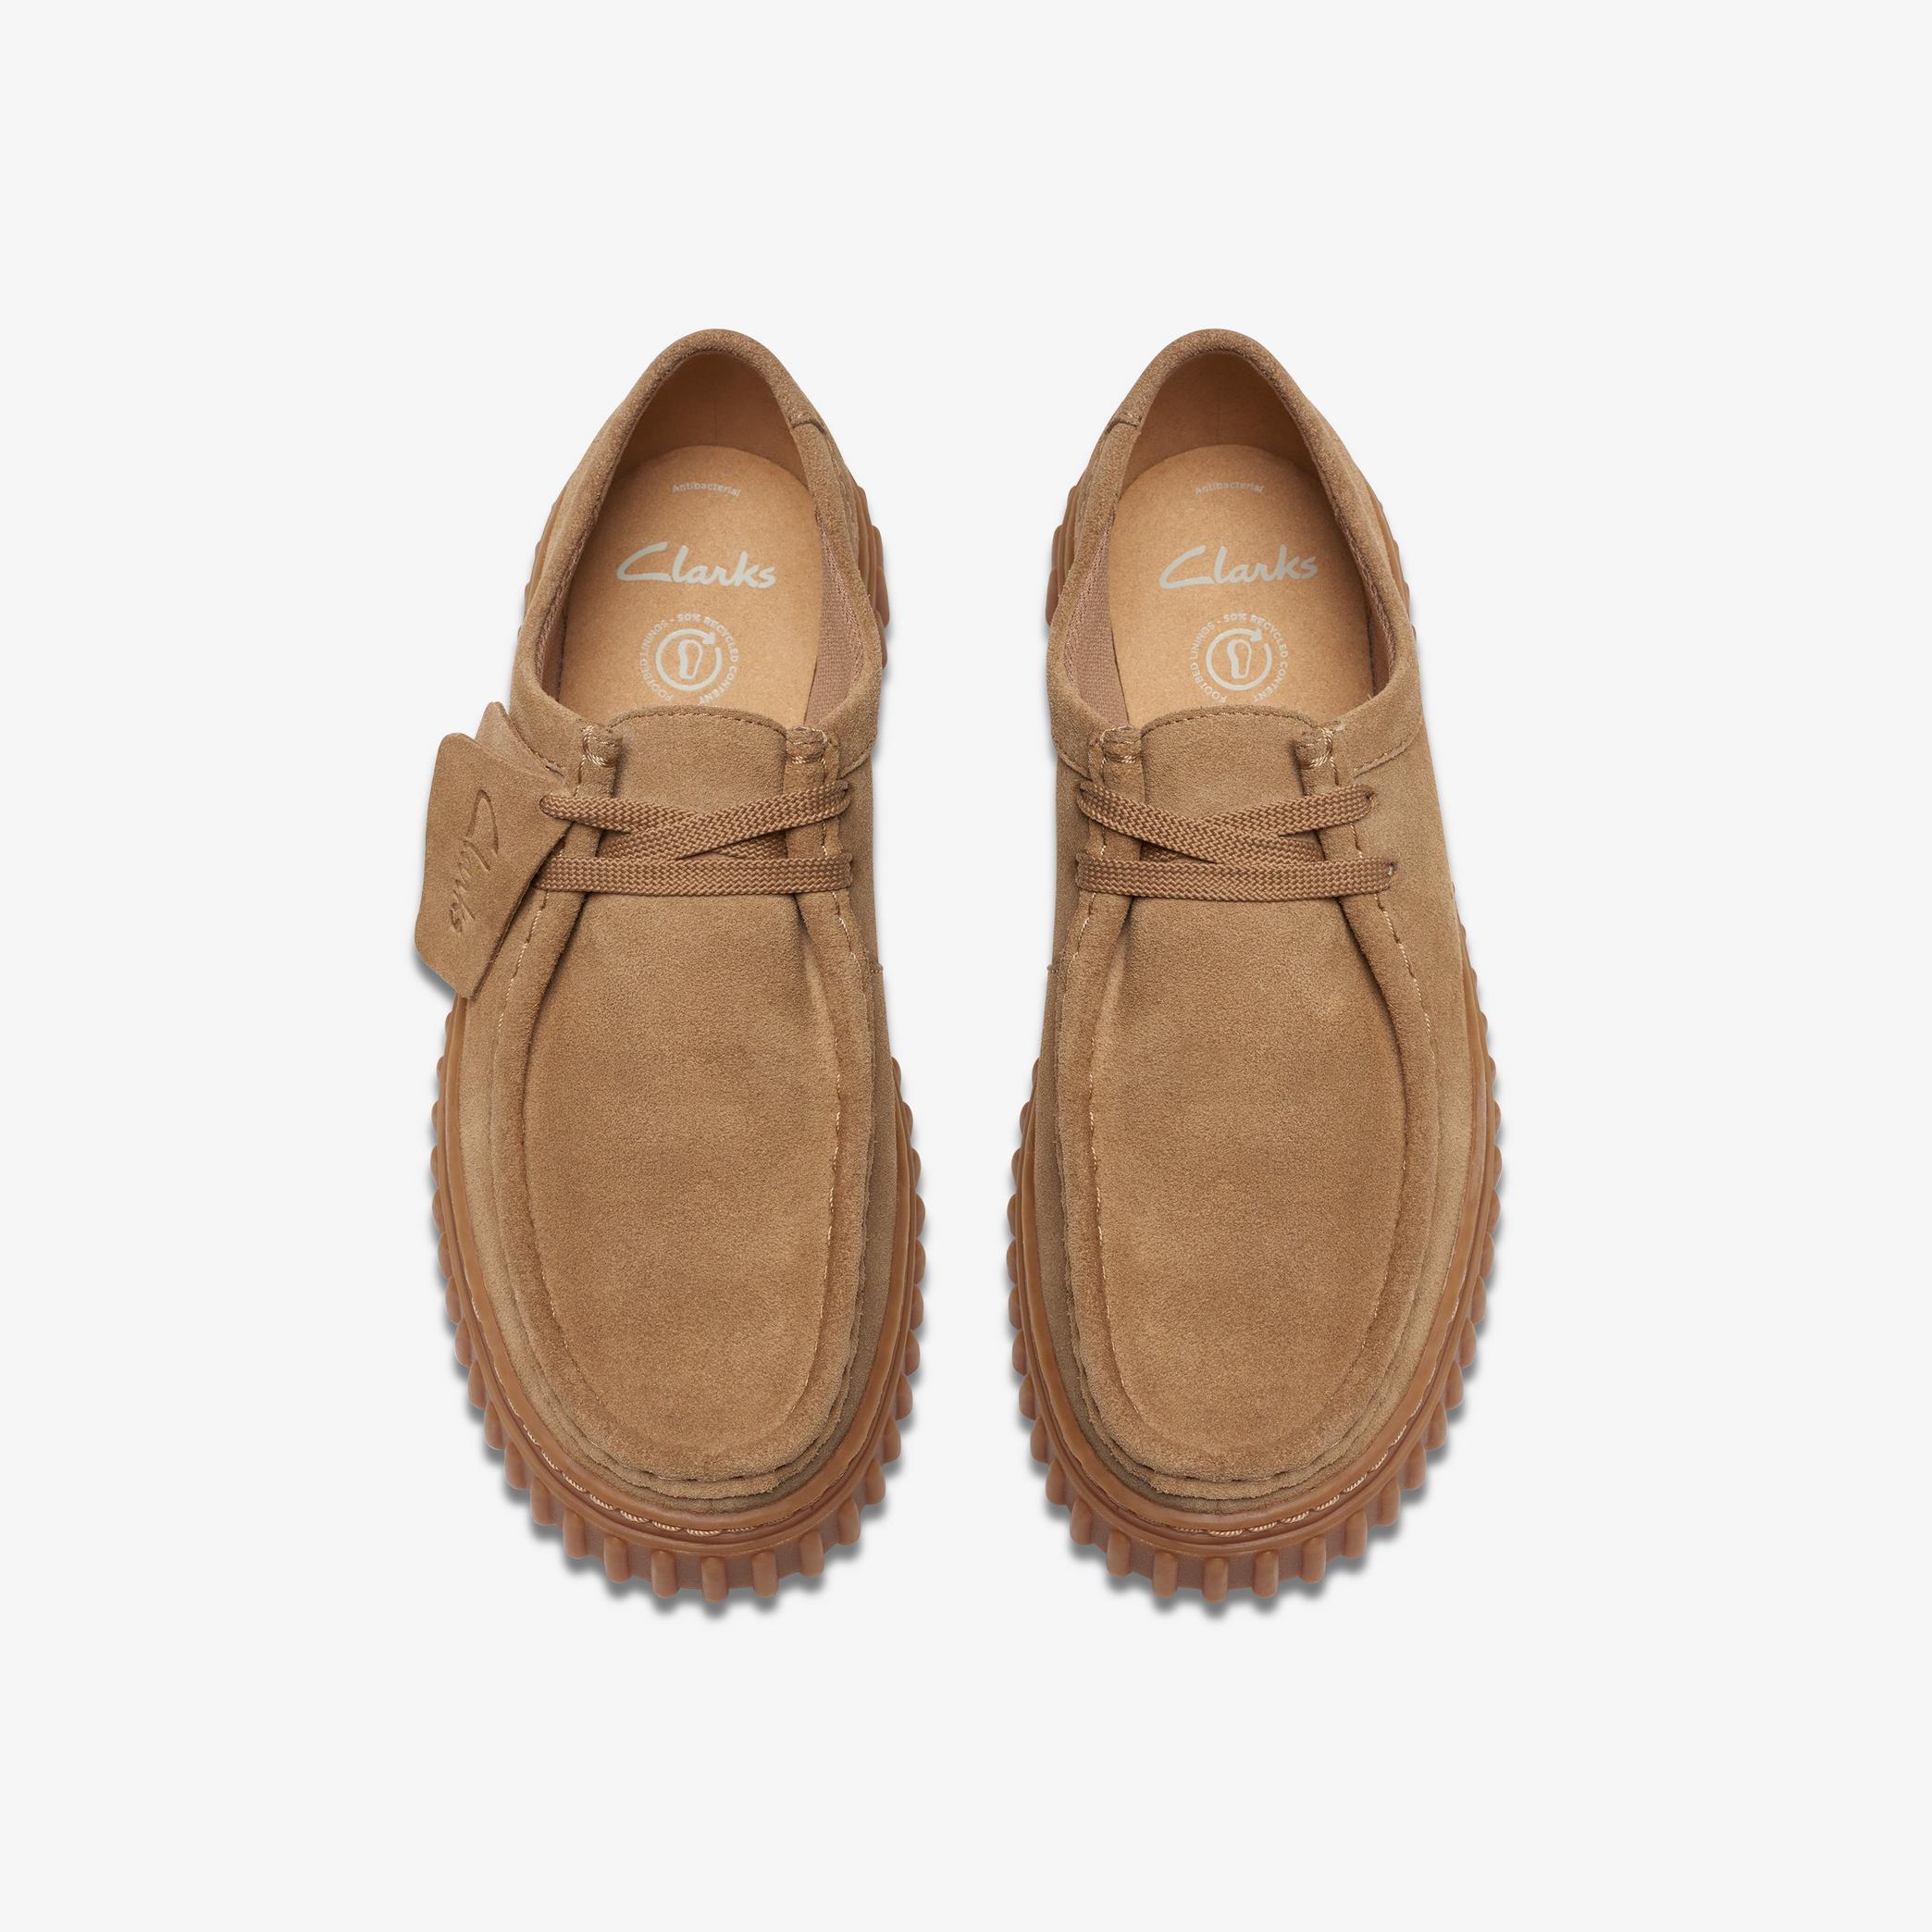 Torhill Lo Kid Dark Sand Suede Moccasins, view 8 of 8